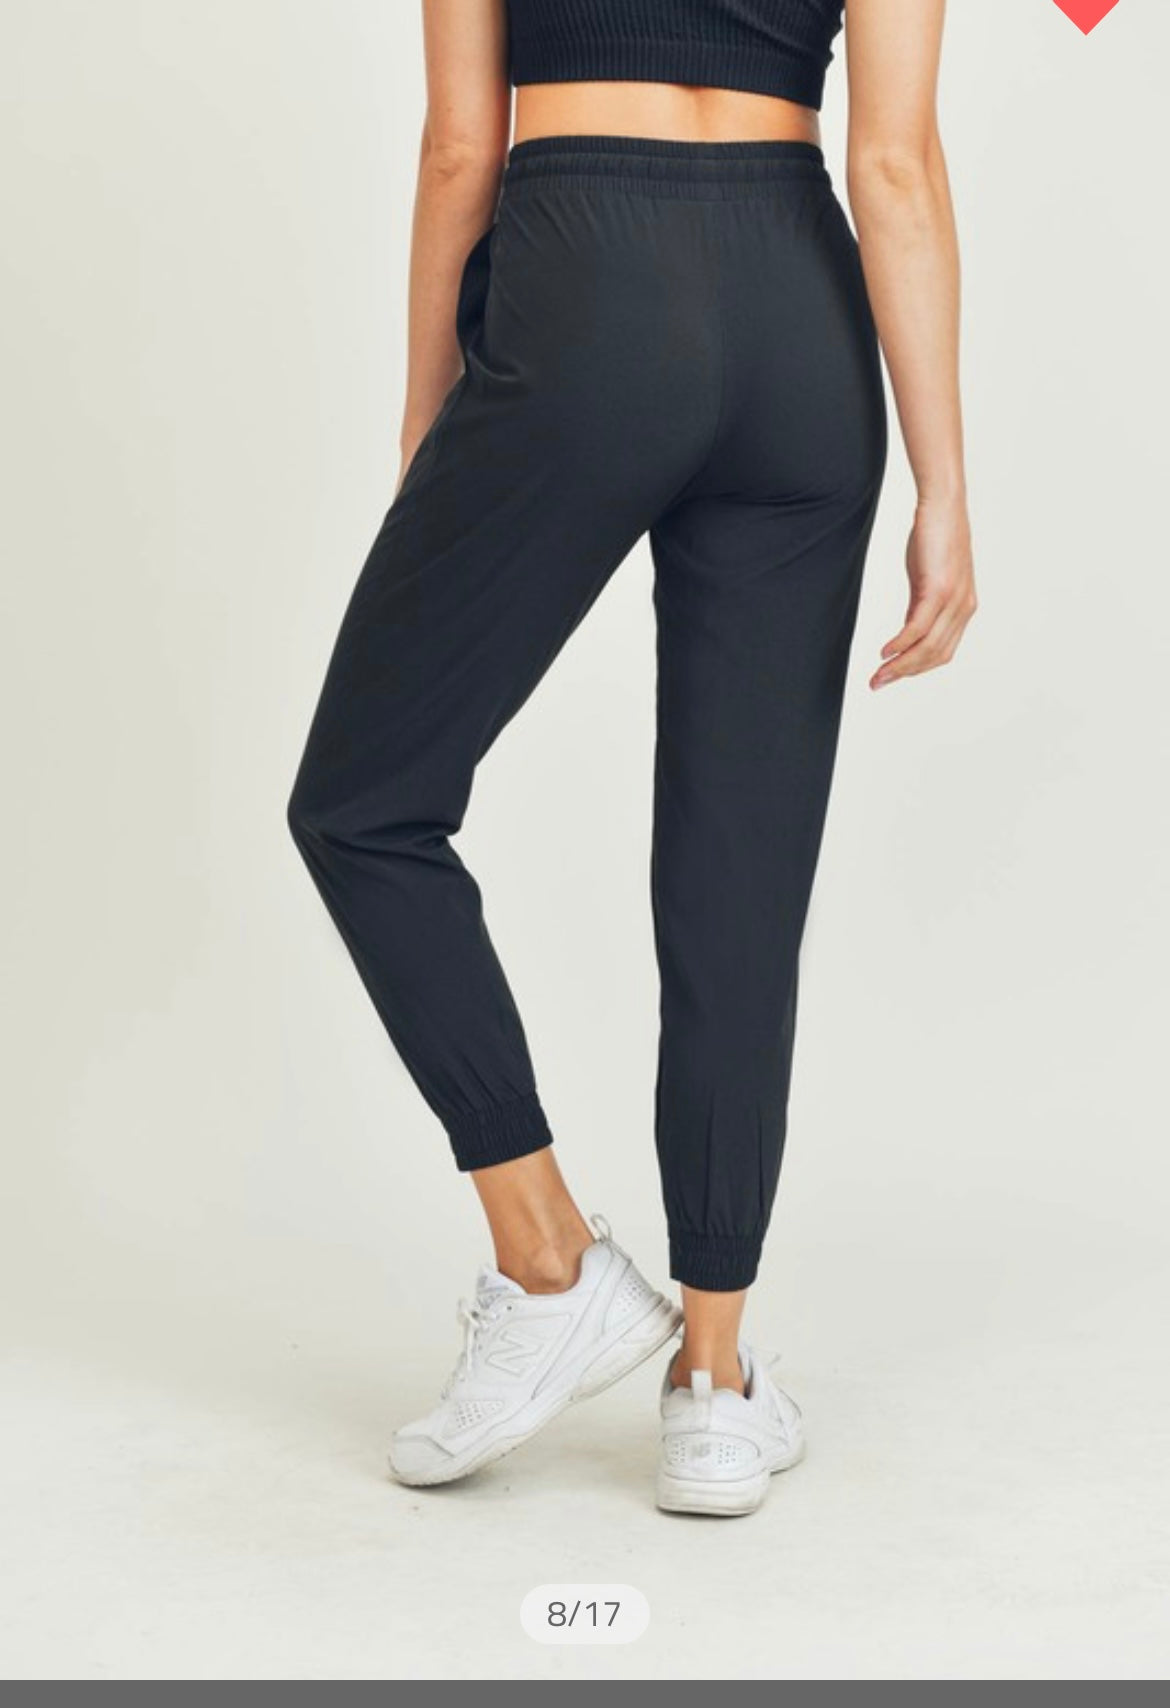 The Demi Athleisure Joggers